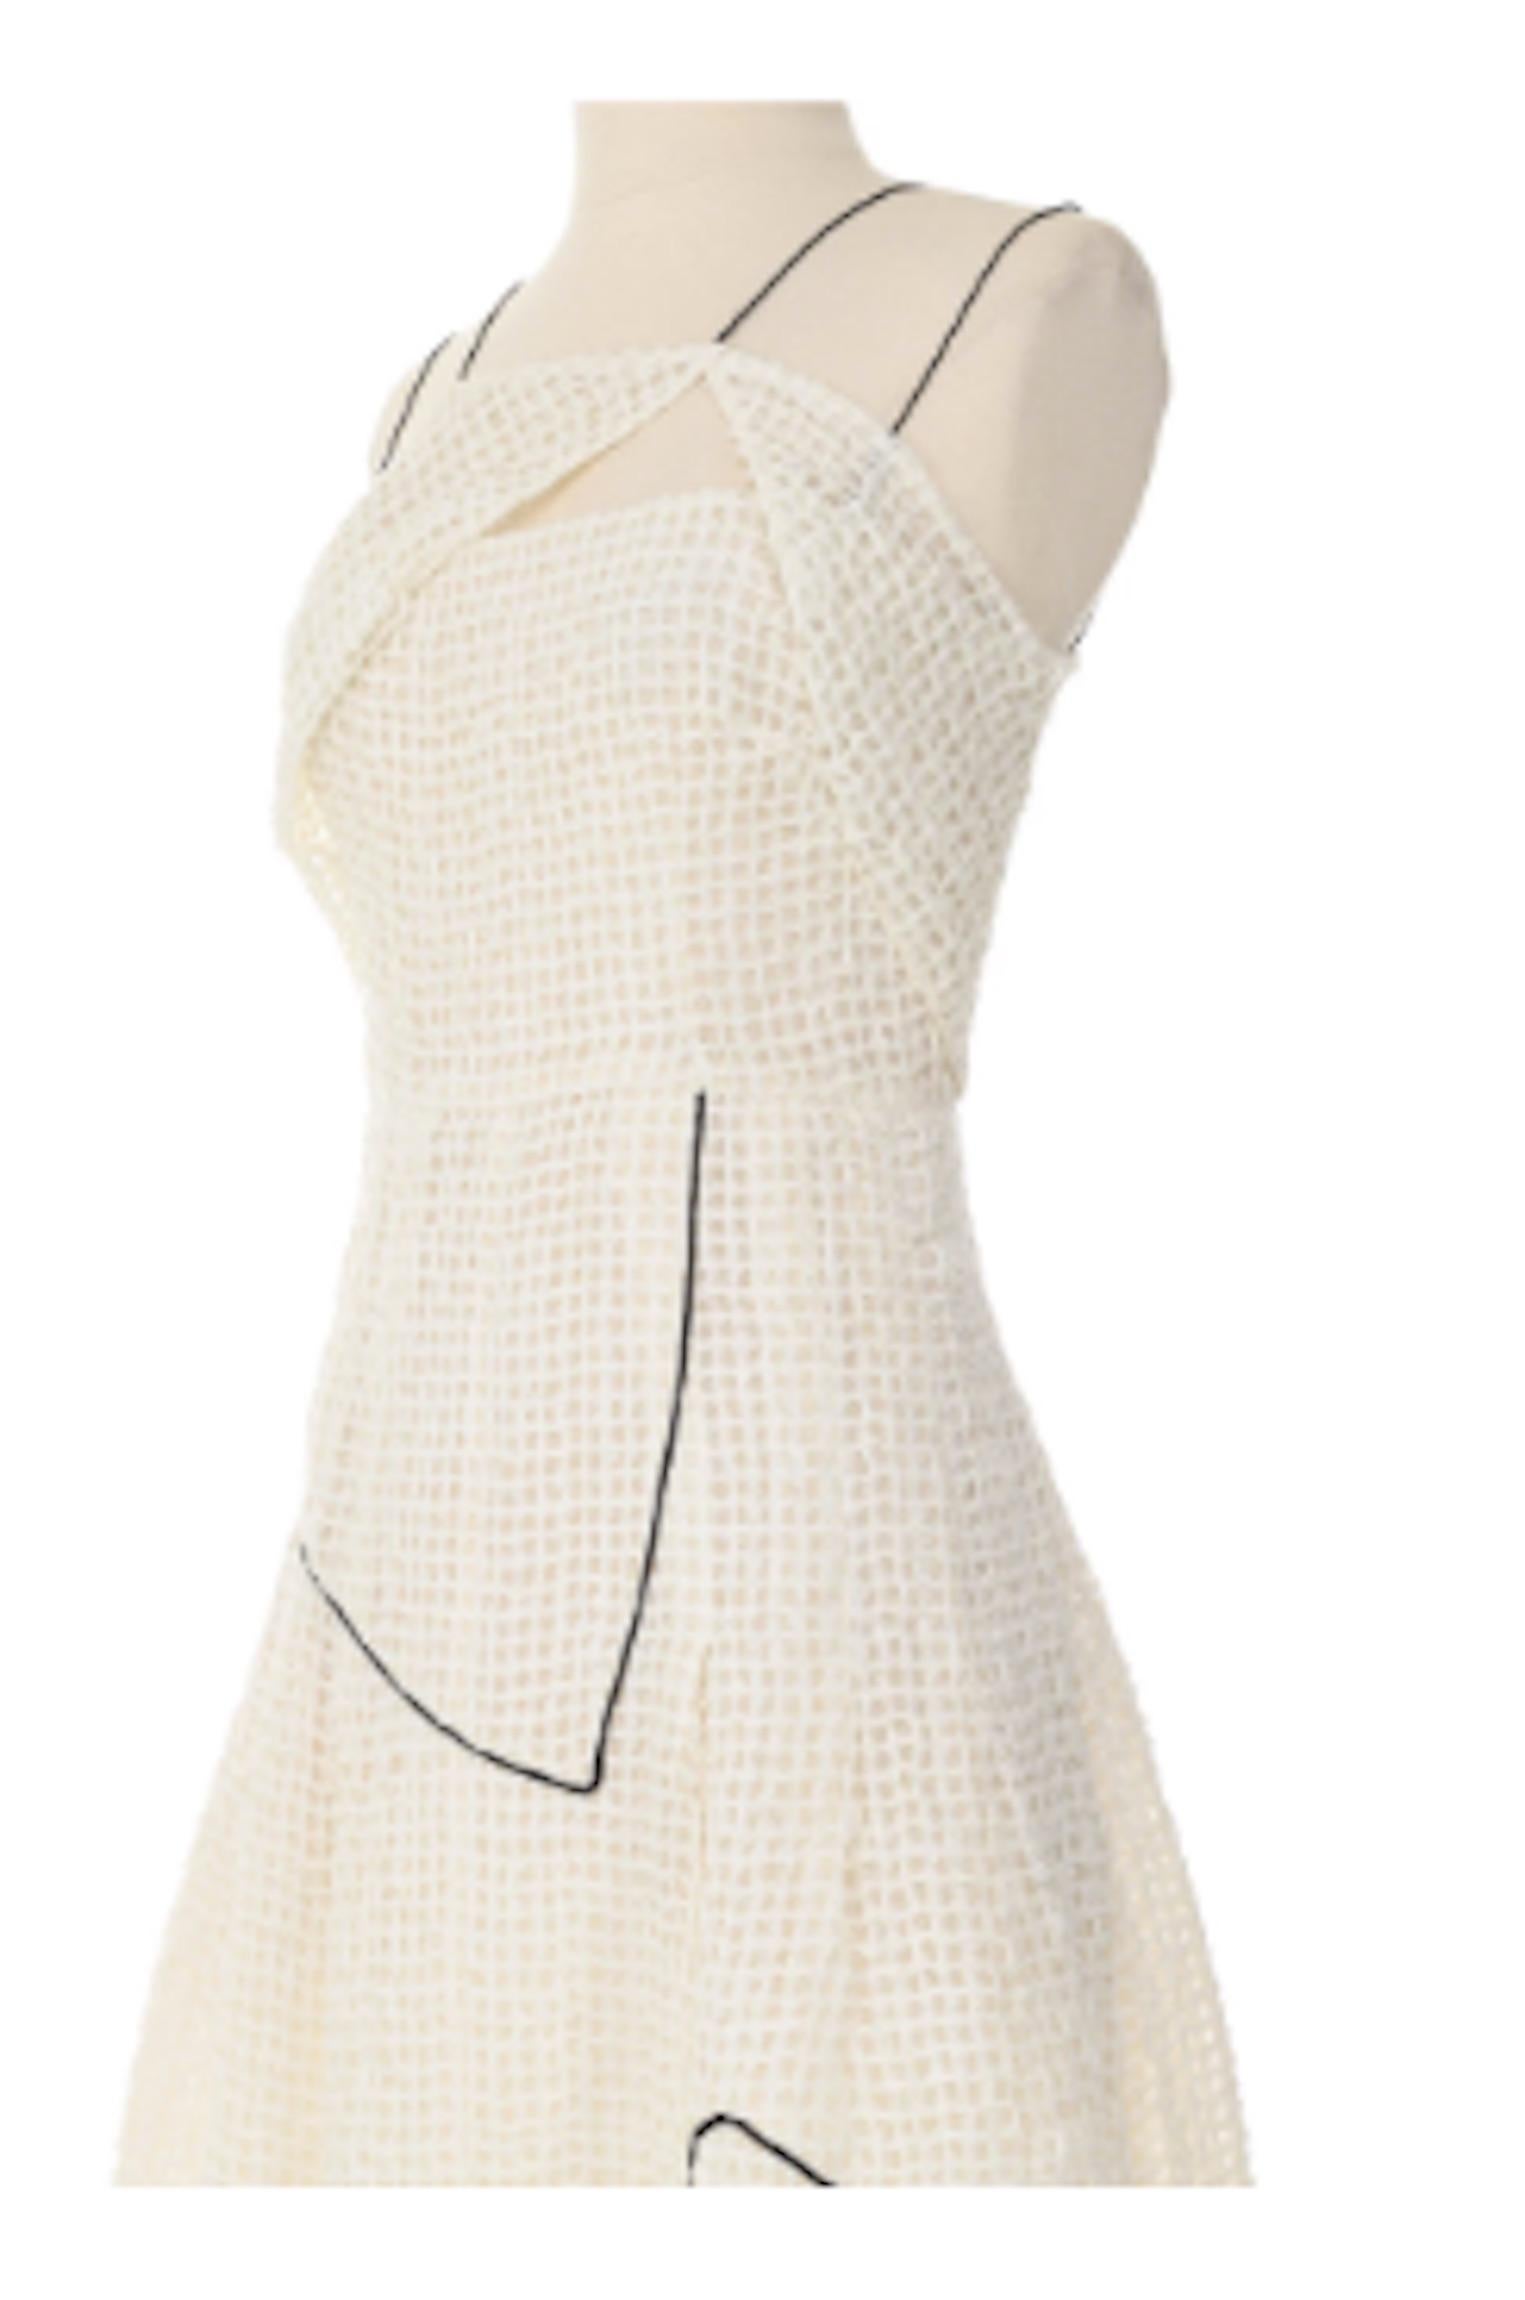 Chanel S/S 2012 Look 7 White Dress With Black Detailing In Excellent Condition For Sale In New York, NY